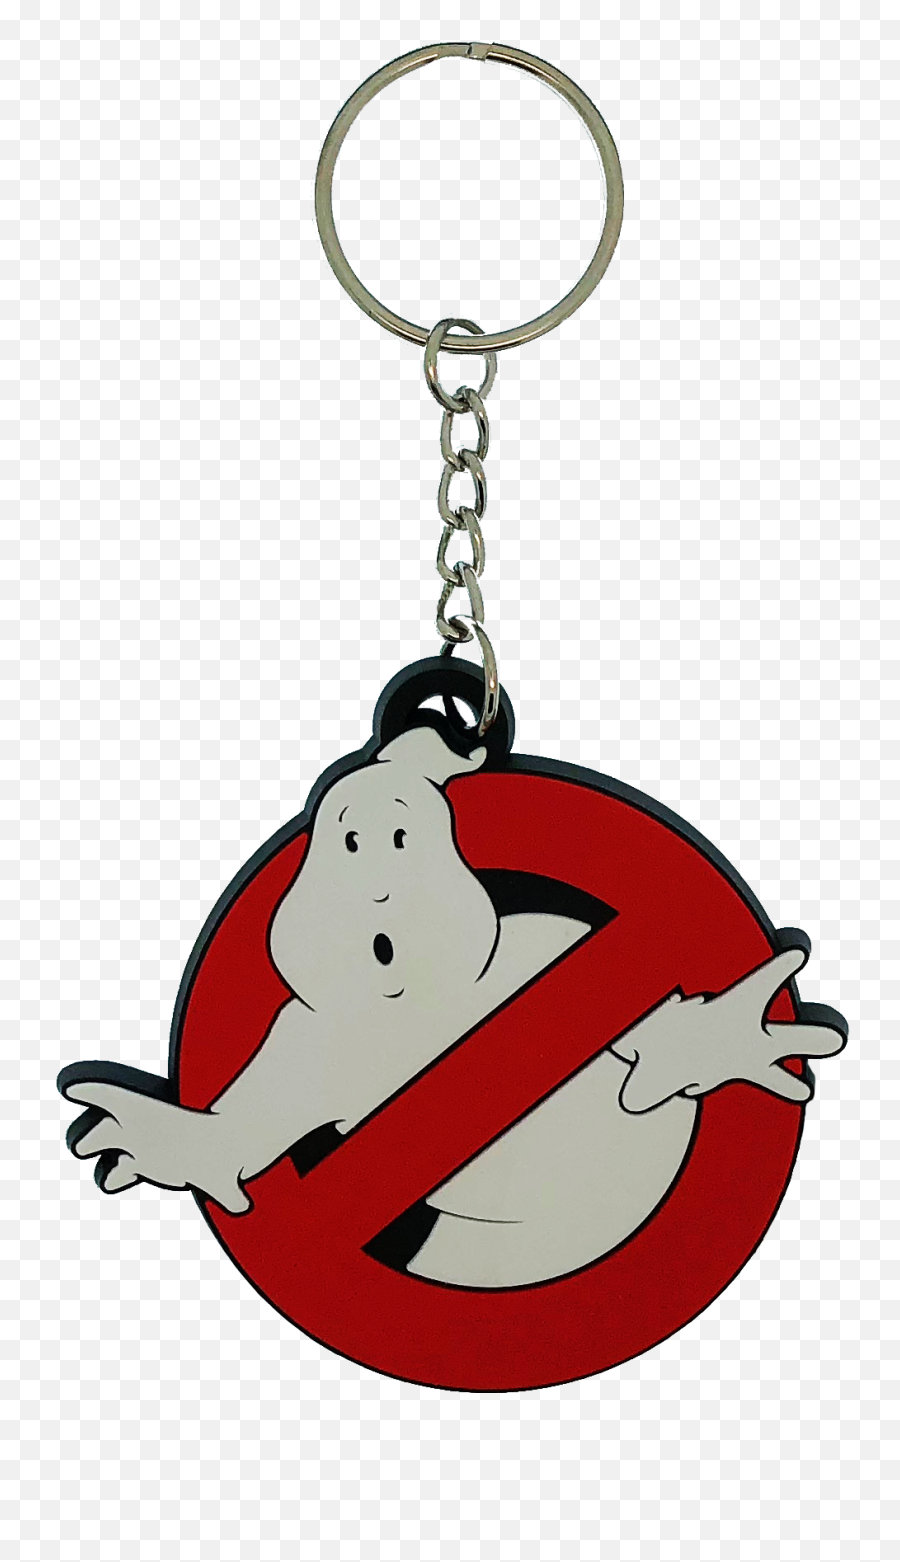 Ghostbusters Rubber Key Chain - Ghostbusters Keychain Png,Ghostbusters Logo Transparent